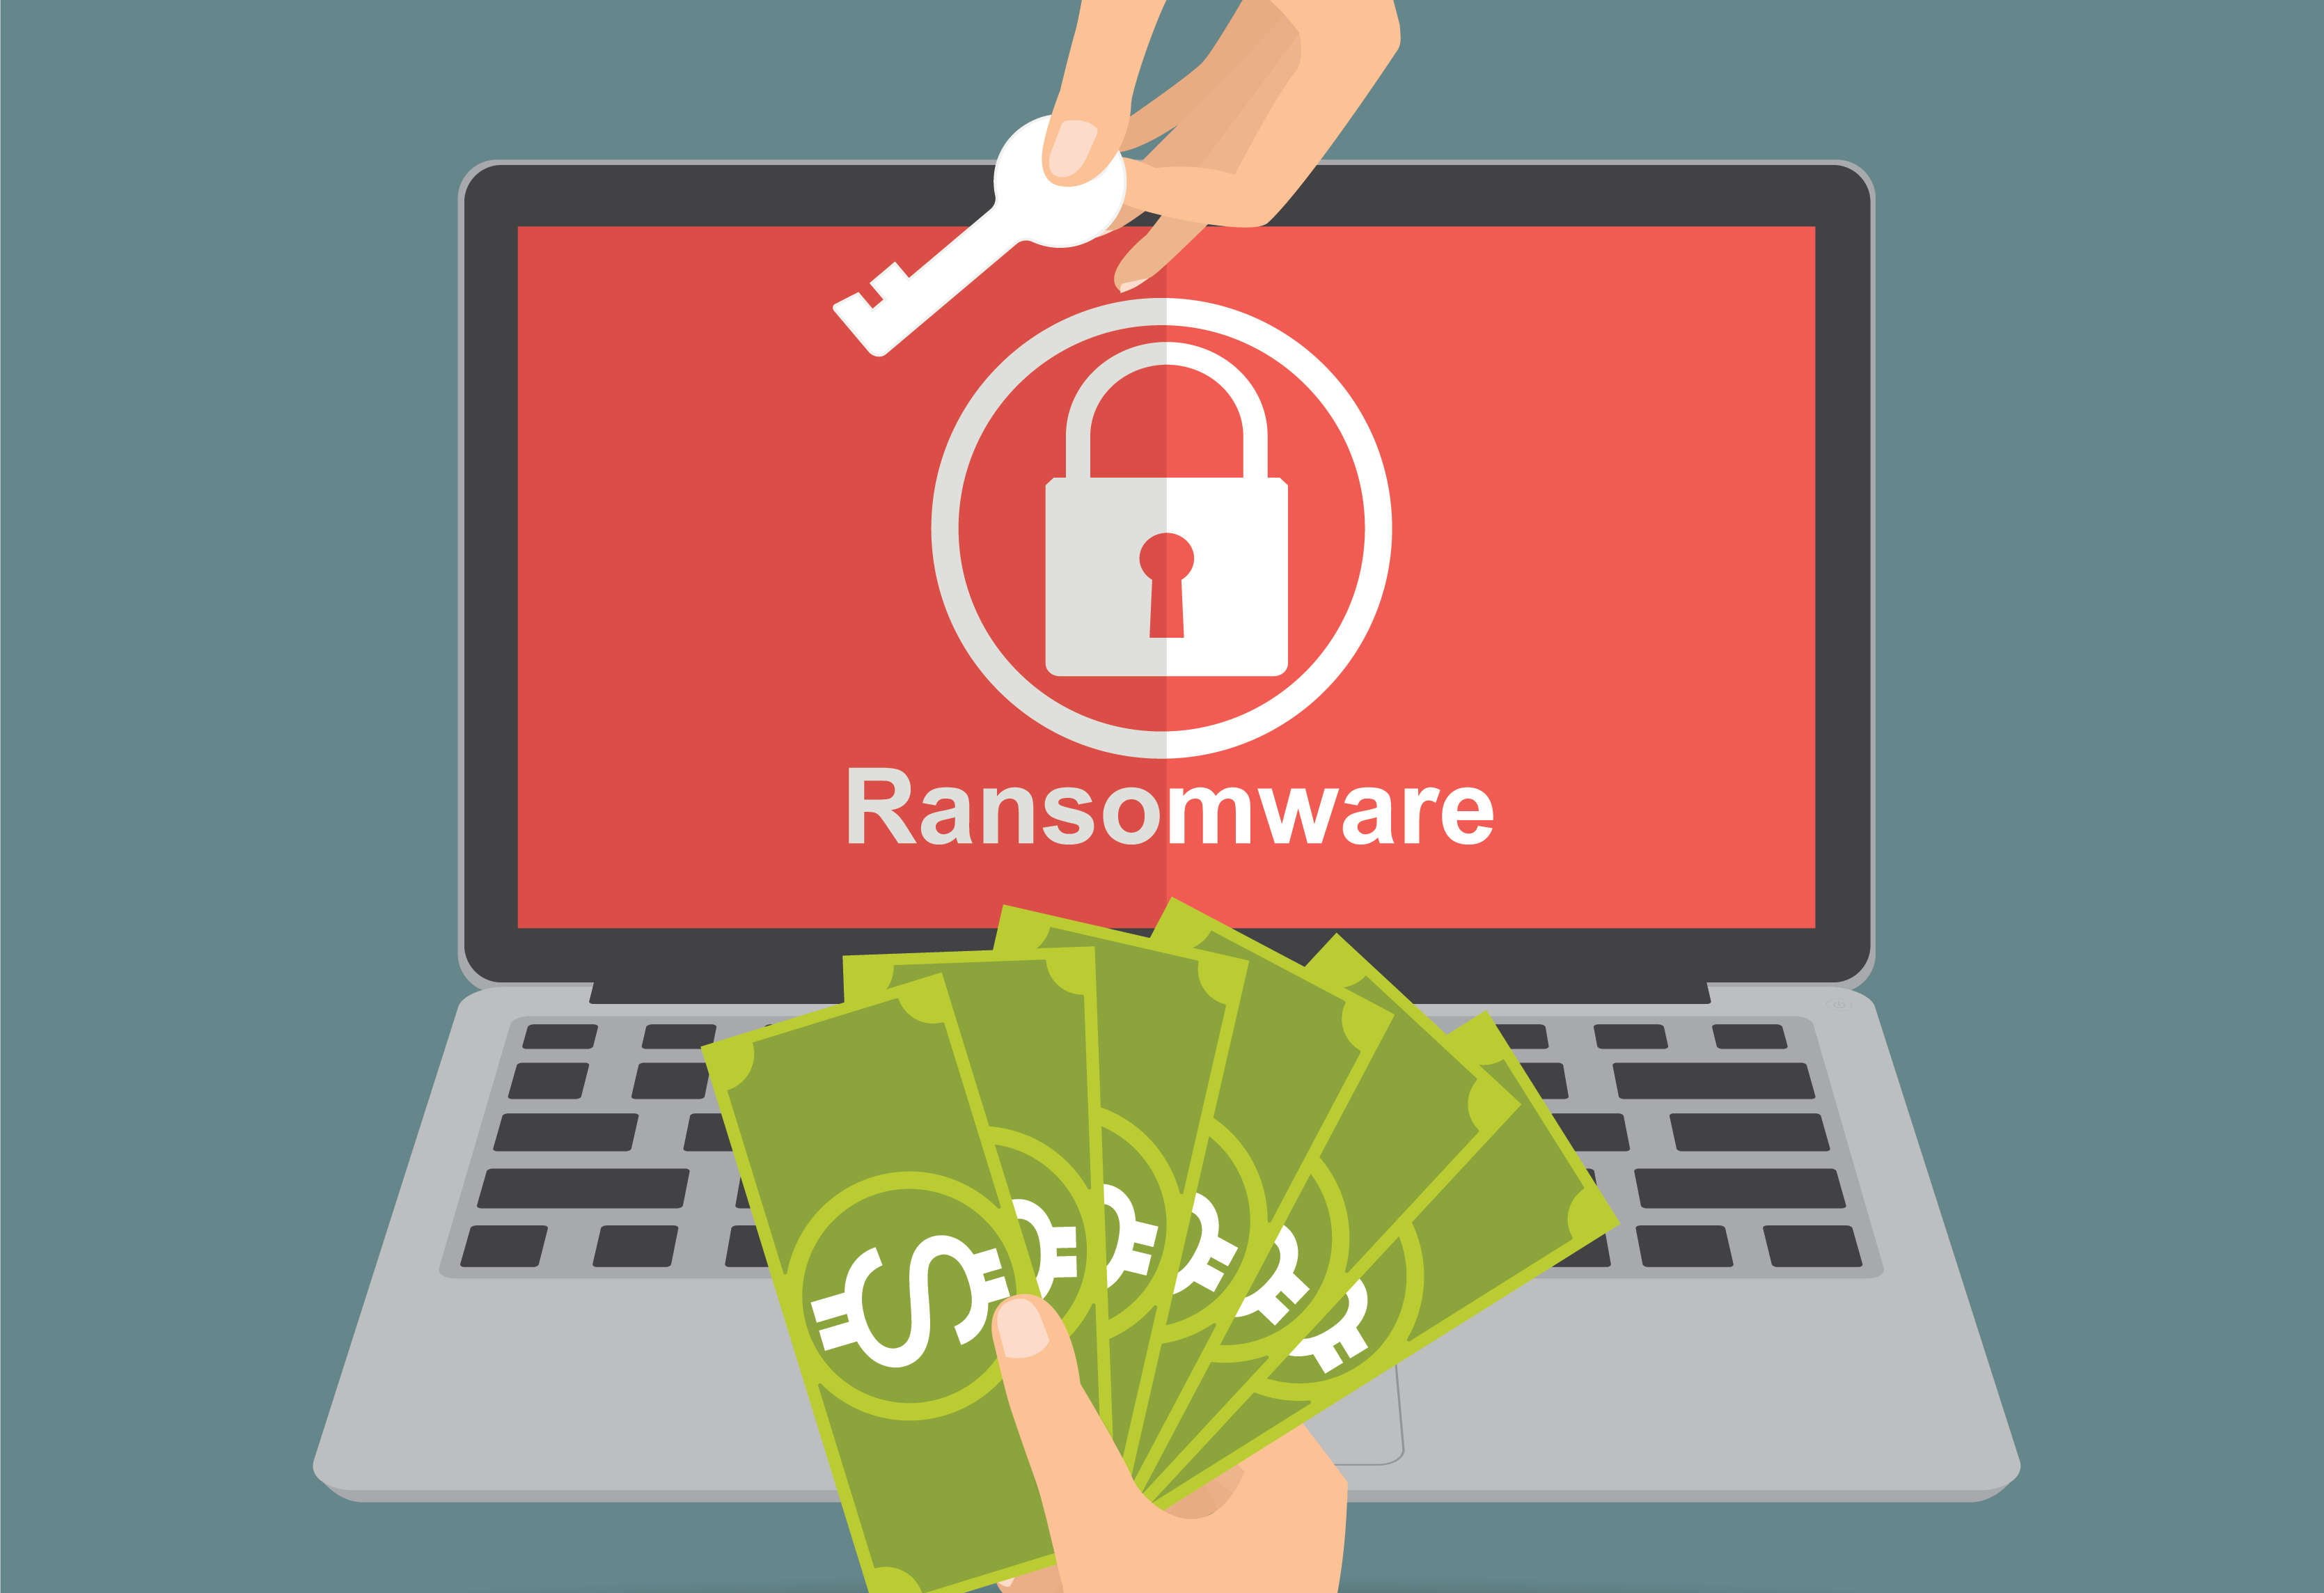 Ryuk ransomware has squeezed more than $150 million from victims